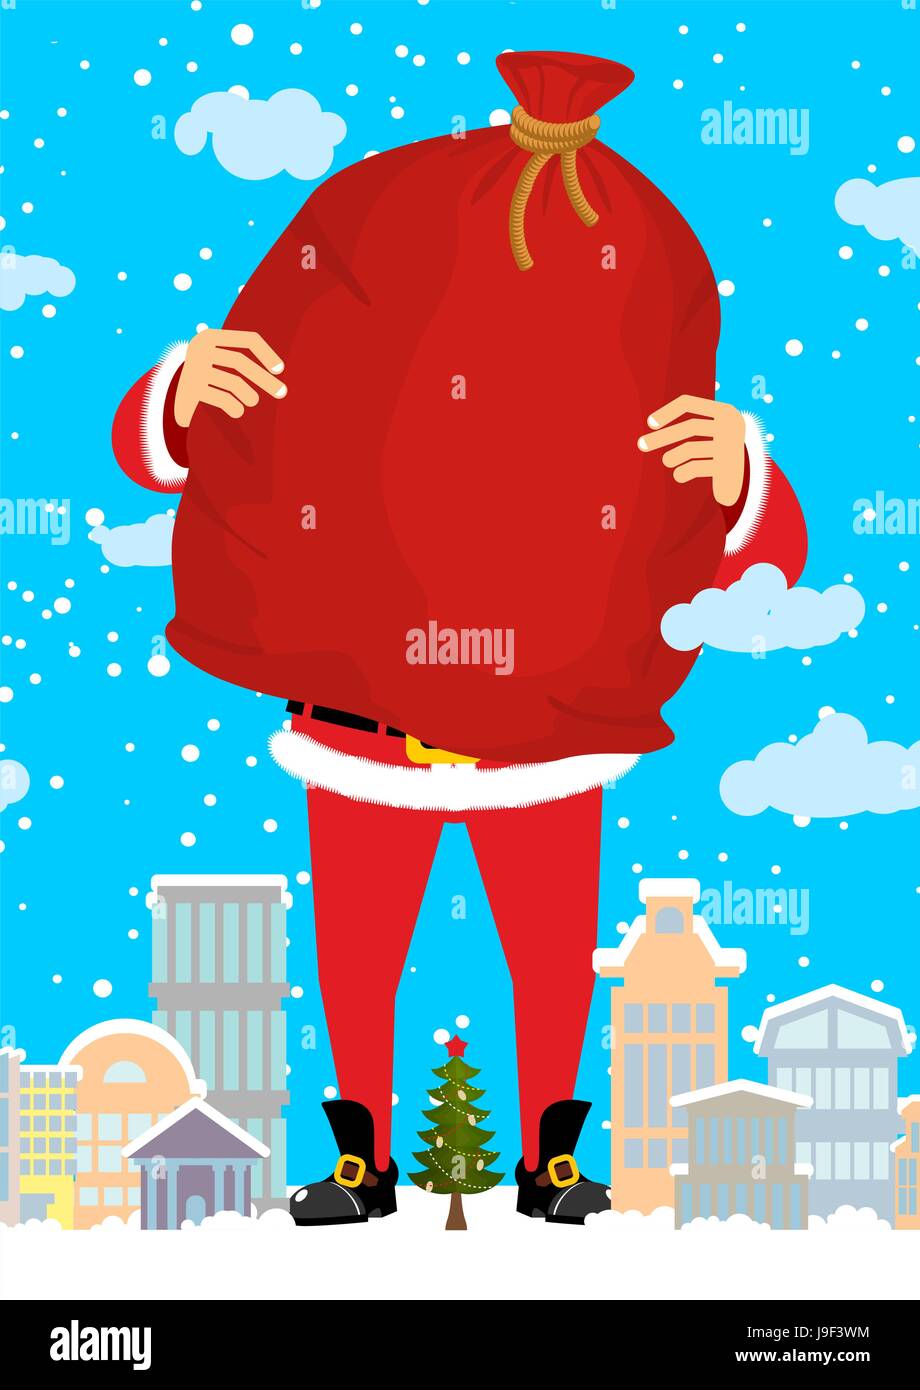 Santa Claus in city carry bag of gifts. Christmas in town. Snow and buildings. High Santa and big red sack walking down street. New Year card. Xmas te Stock Vector